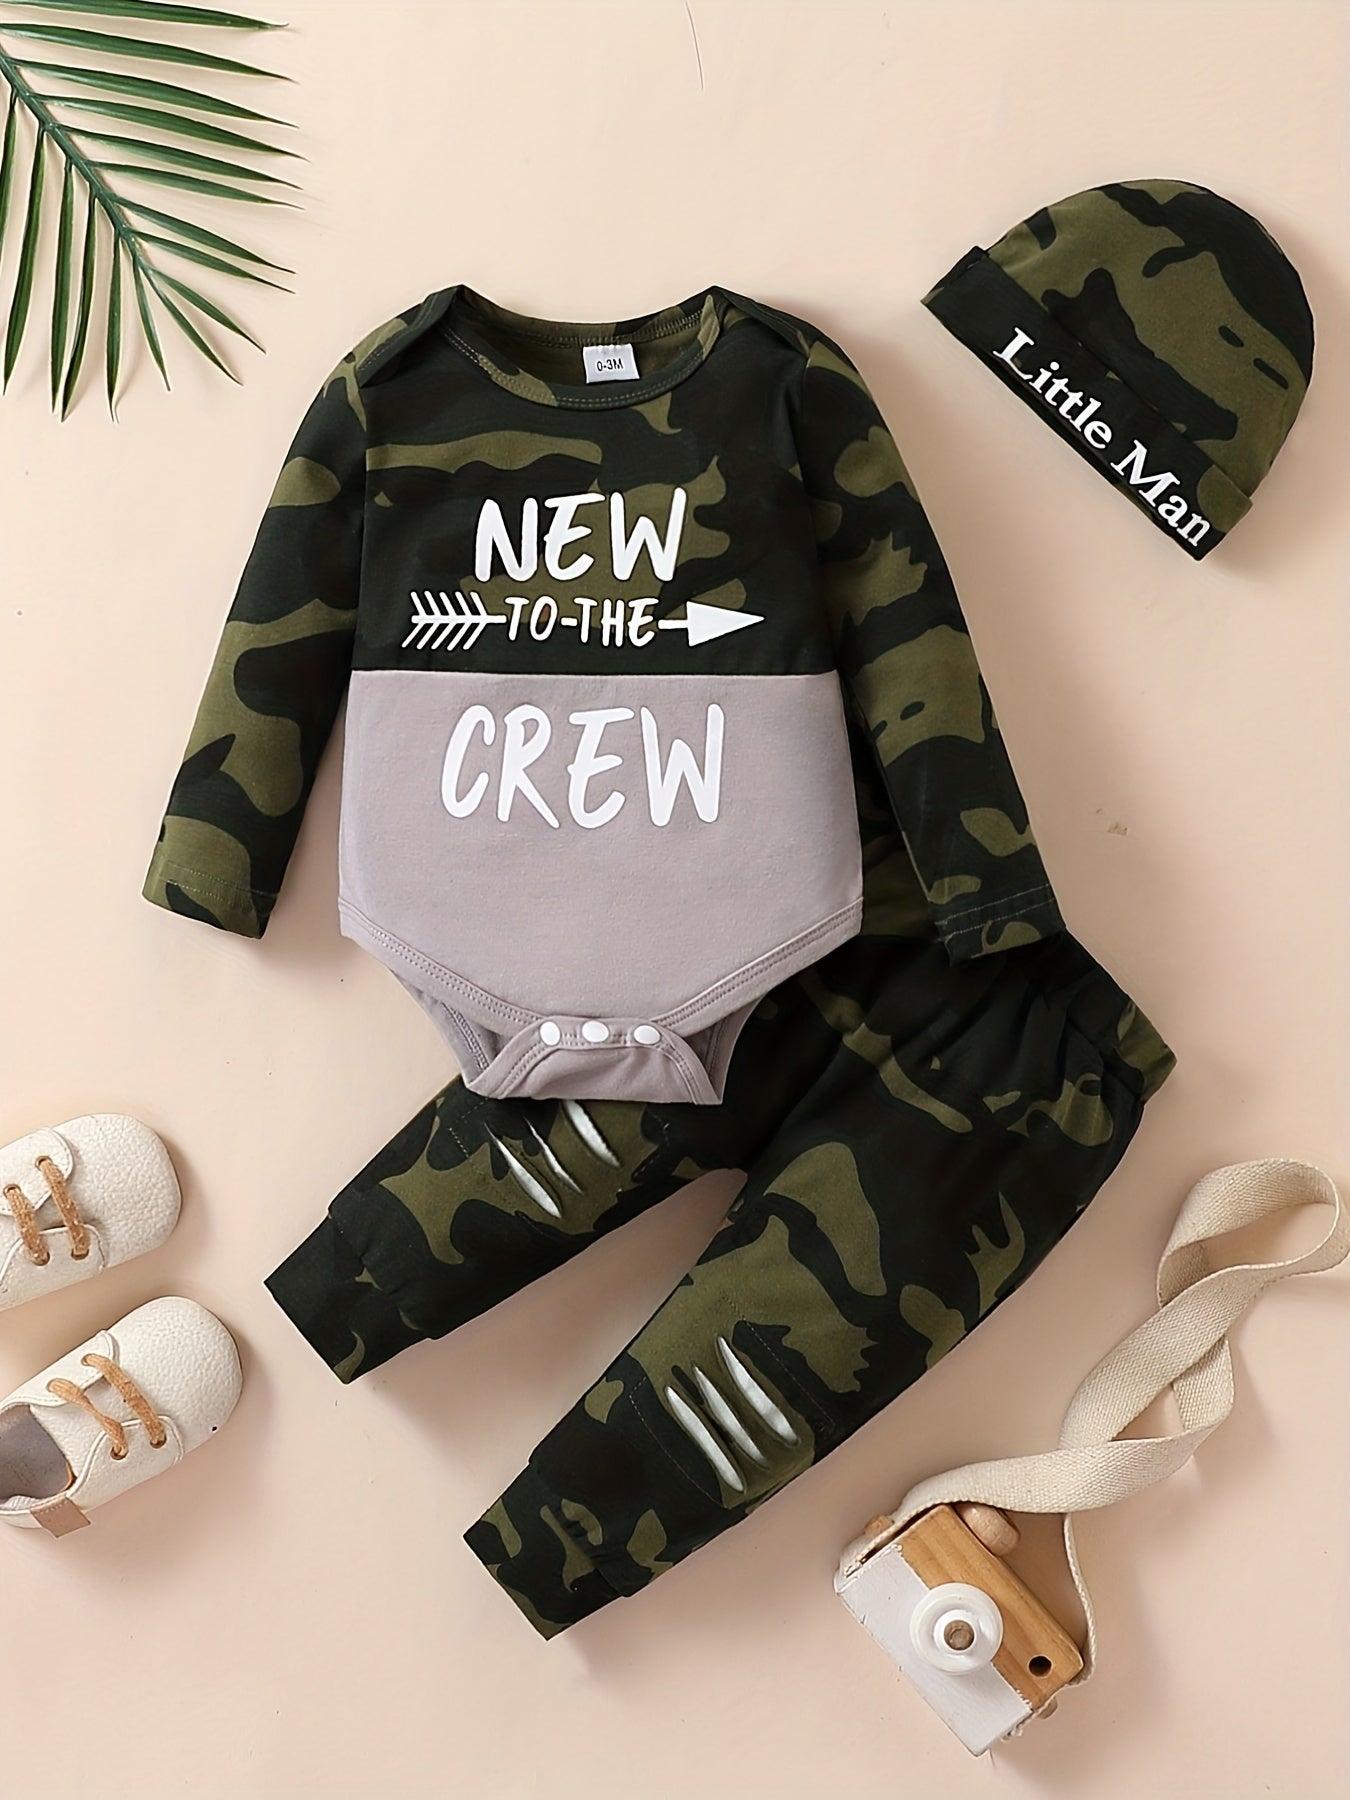 Baby Boy's Camouflage Long Sleeve Suit, NEW TO THE CREW Letter Printed Romper & Trousers Set, Cotton Comfy Casual Set For Newborn